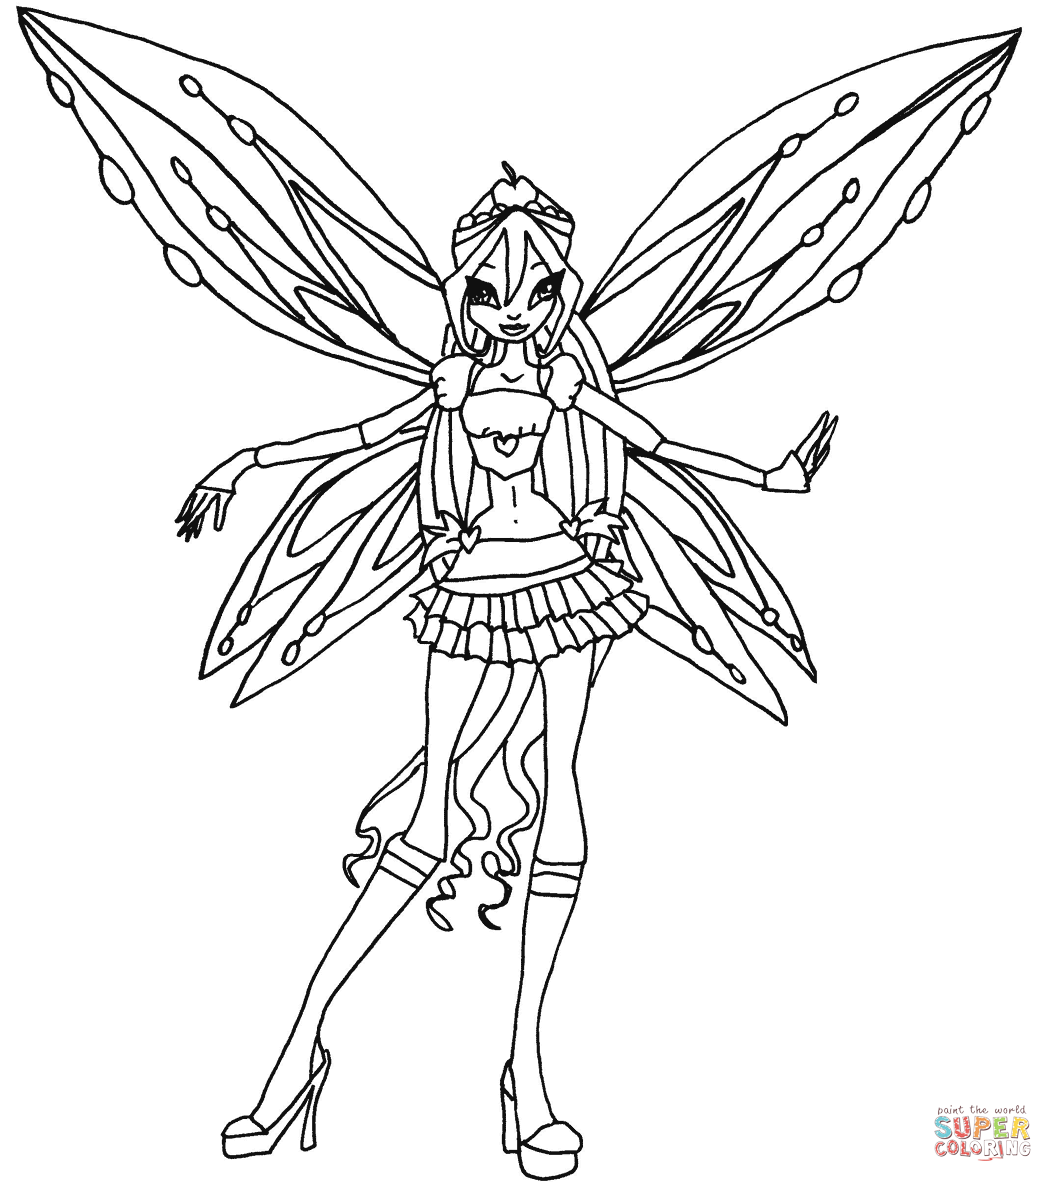 Winx Coloring Pages With Winx Club Coloring Books Coloring Pages Disney Princess Drawings